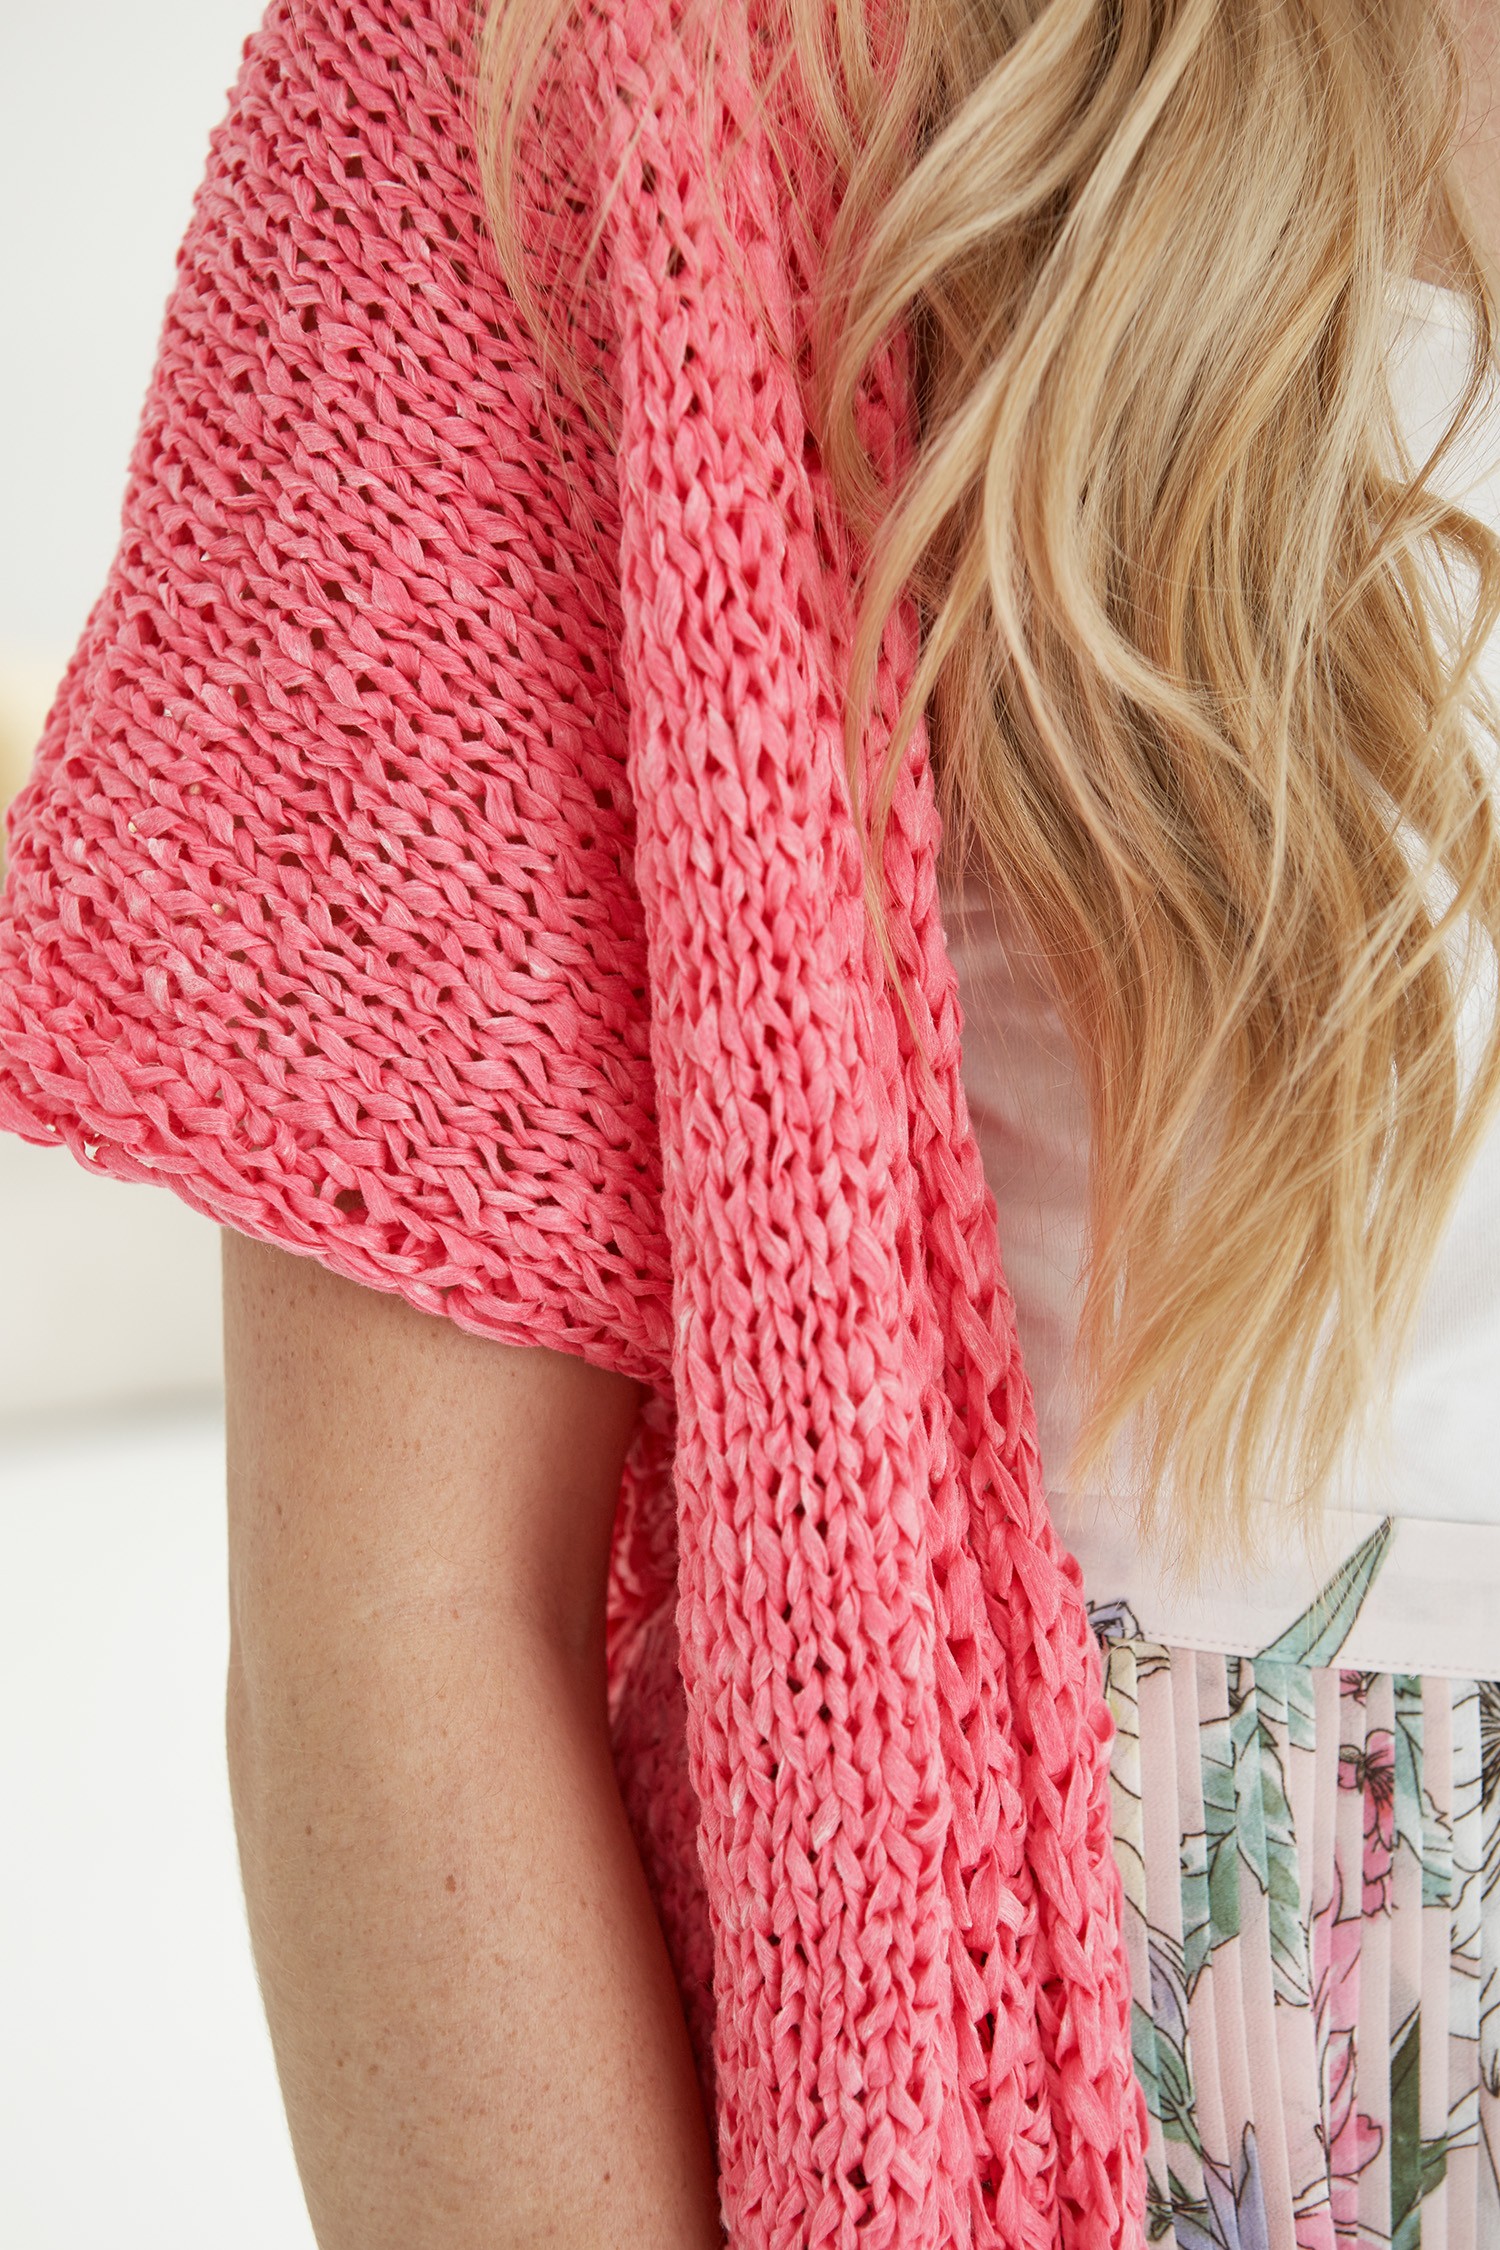 Breezy Cardigan (Knit) in Think Pink